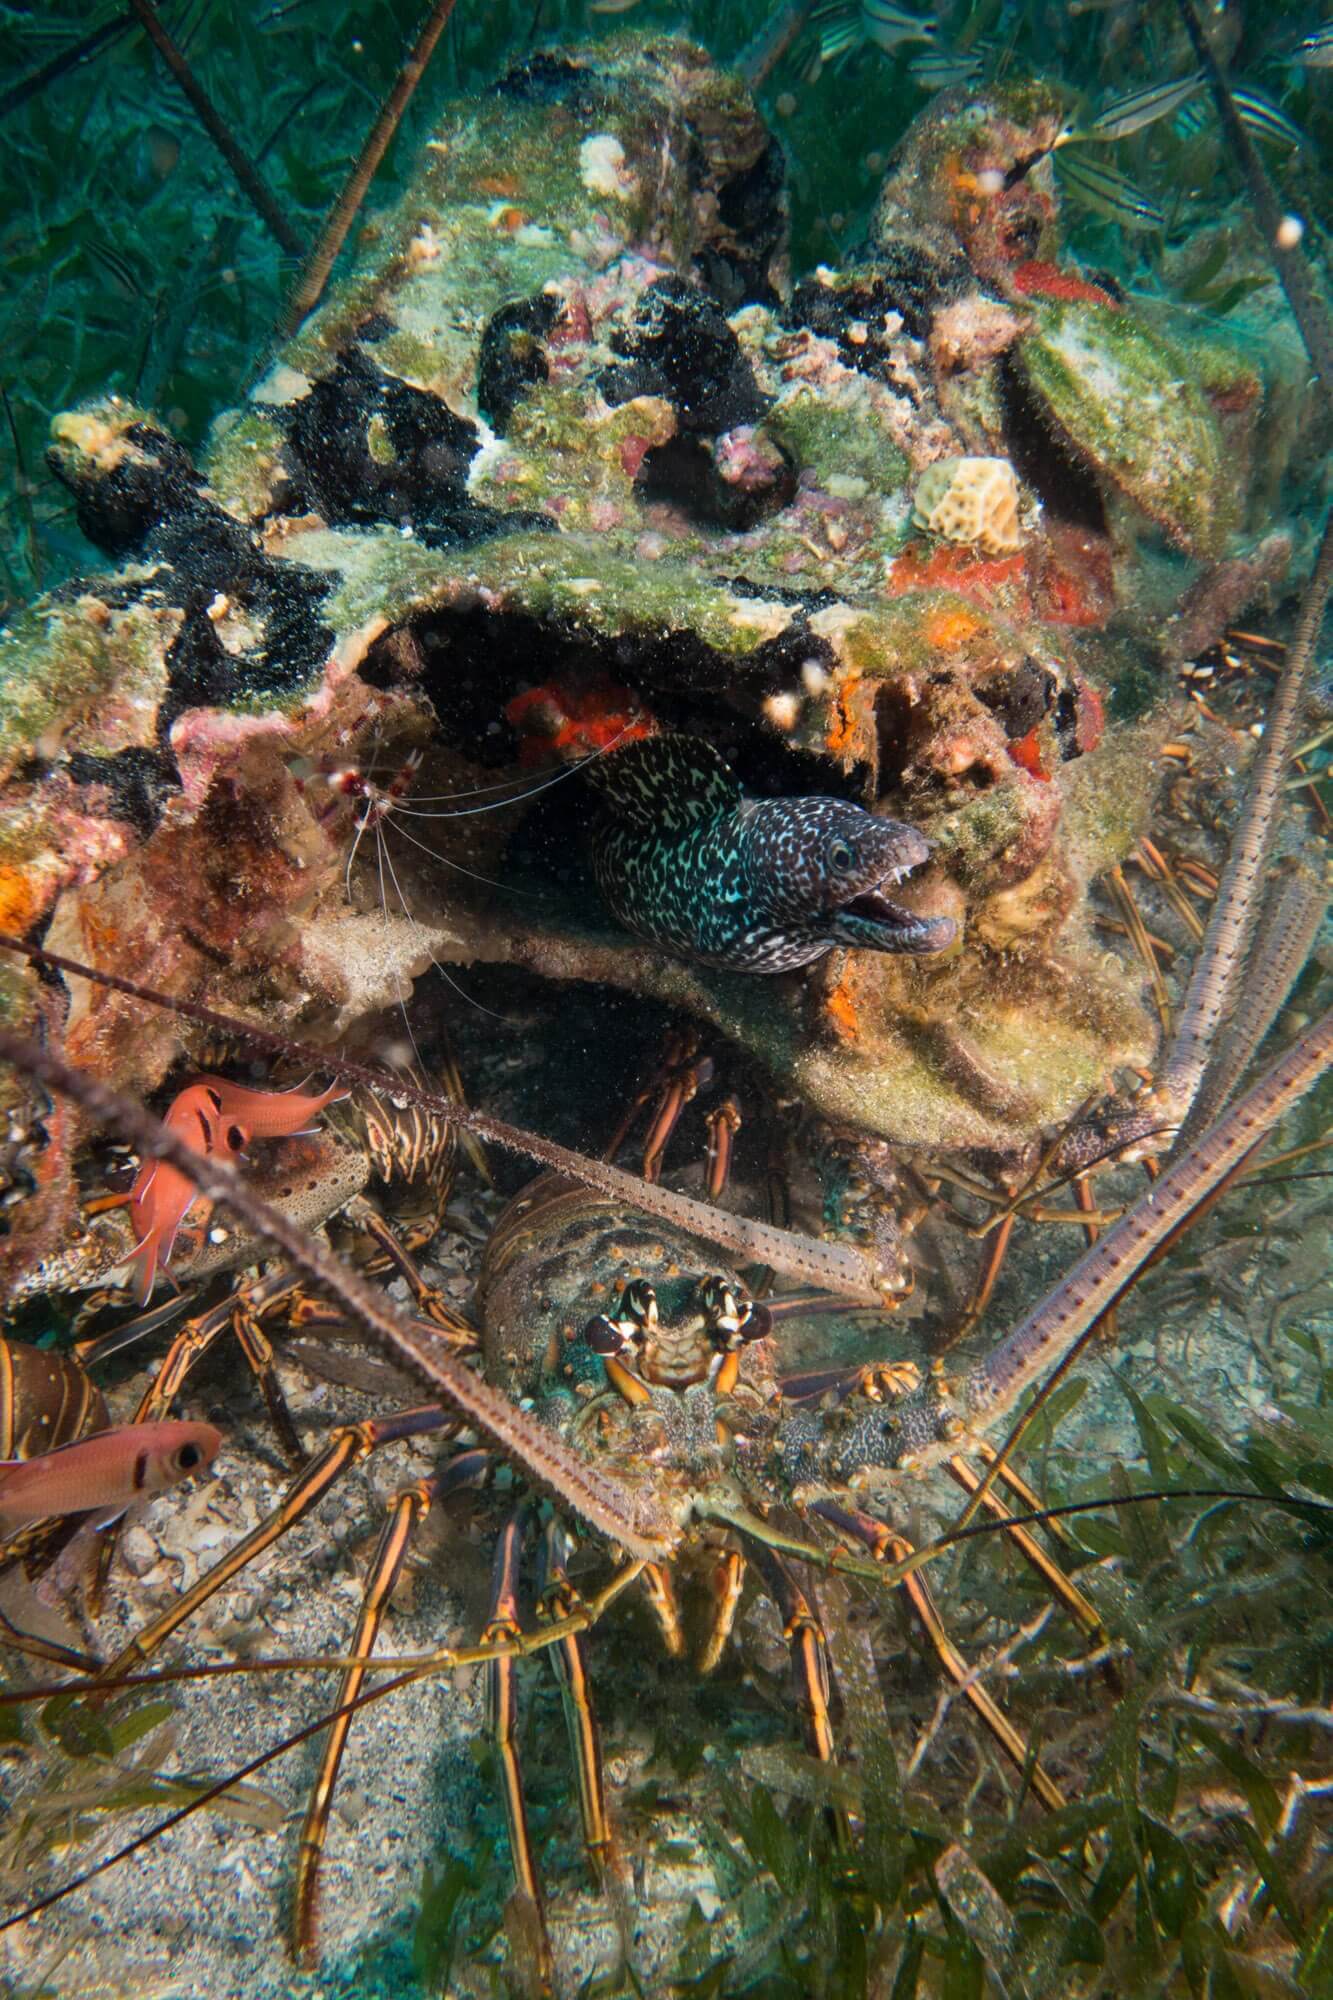 A spotted moray eel, several spiny lobsters, a banded coral shrimp and many species of fish in St. Kitts